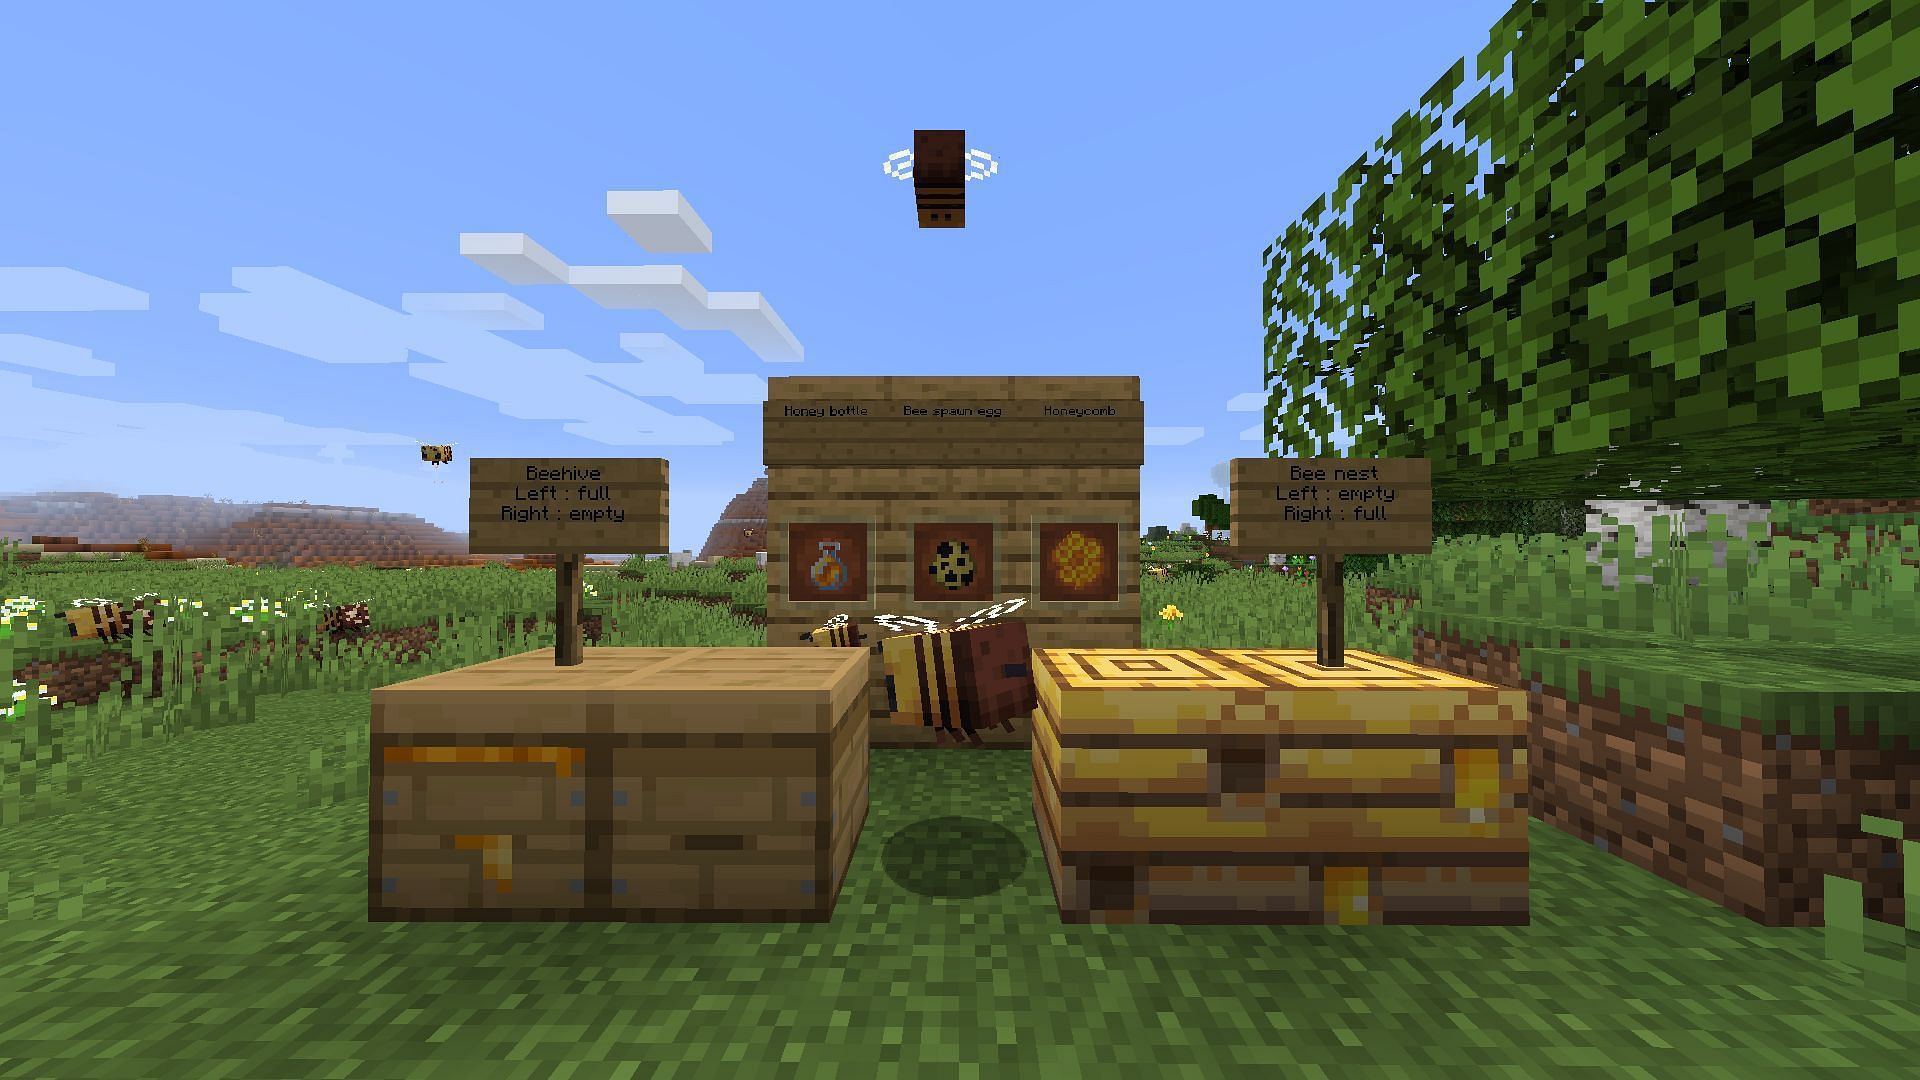 Honeycombs are a useful item in several crafting recipes and waxing copper (Image via Minecraft)